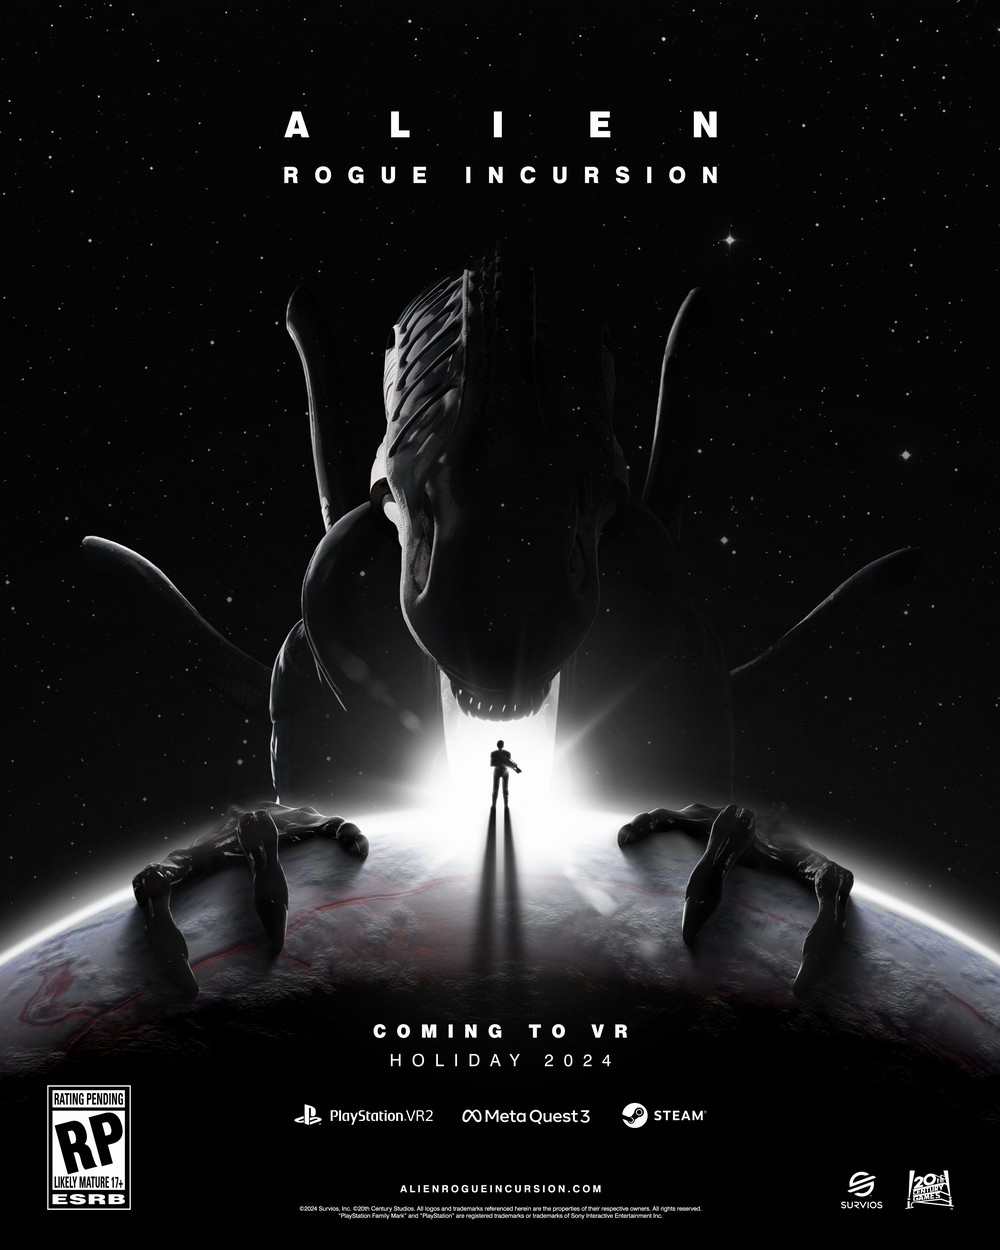 ALIEN: ROGUE INCURSION, the First Action-Horror VR Game Set in the Alien Universe,  Arrives Holiday 2024 from Leading Game Developer Survios